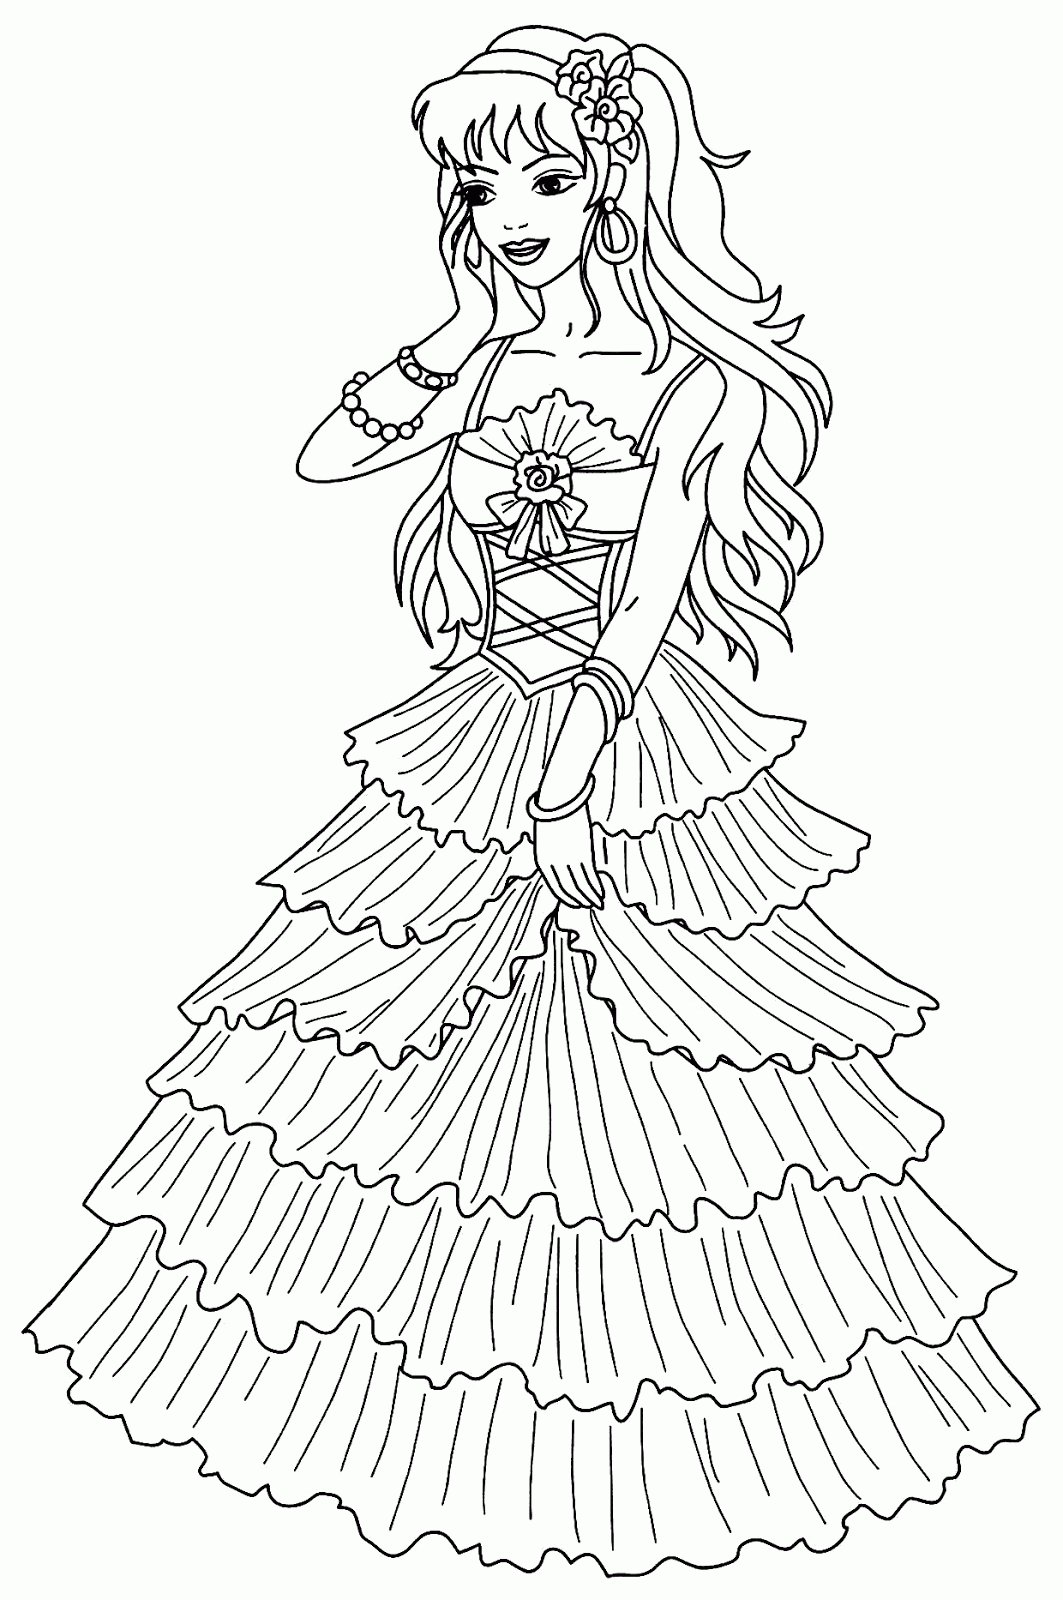 coloring pictures of princesses princess coloring pages best coloring pages for kids of princesses pictures coloring 